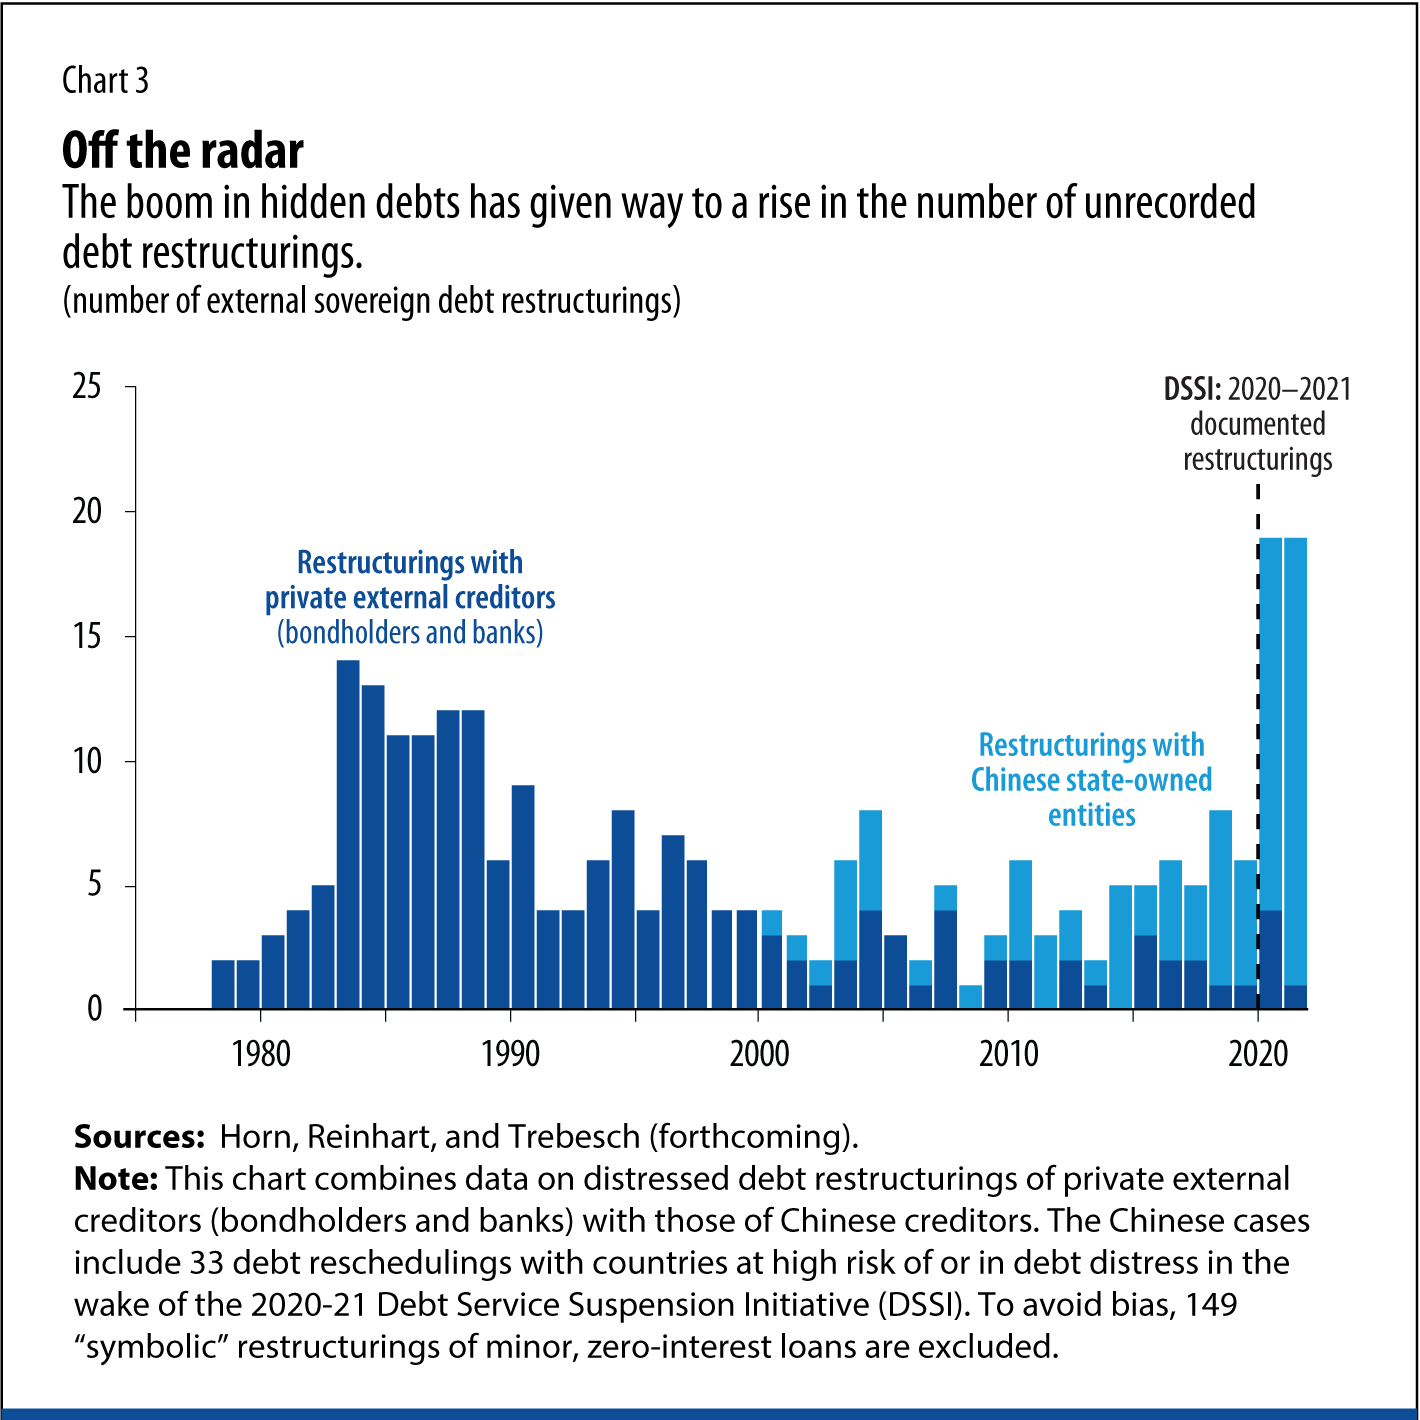 The boom in hidden debts has given way to a rise in the number of unrecorded debt restructurings.